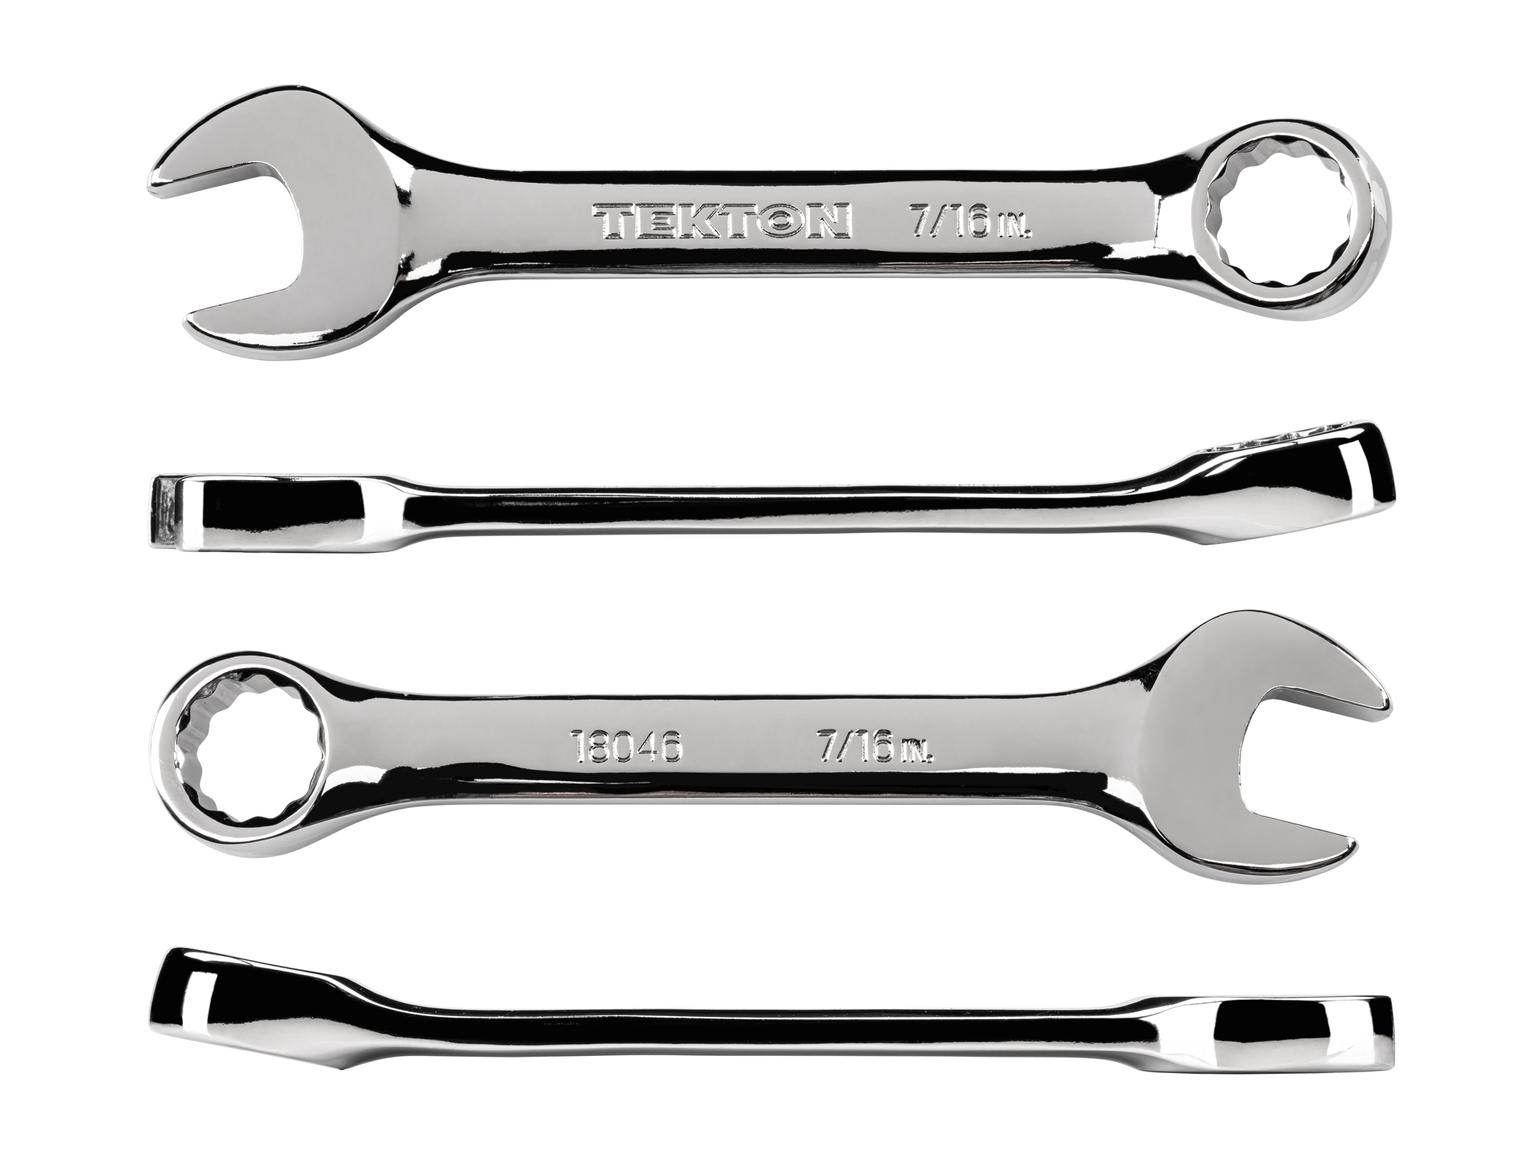 TEKTON 18046-T 7/16 Inch Stubby Combination Wrench